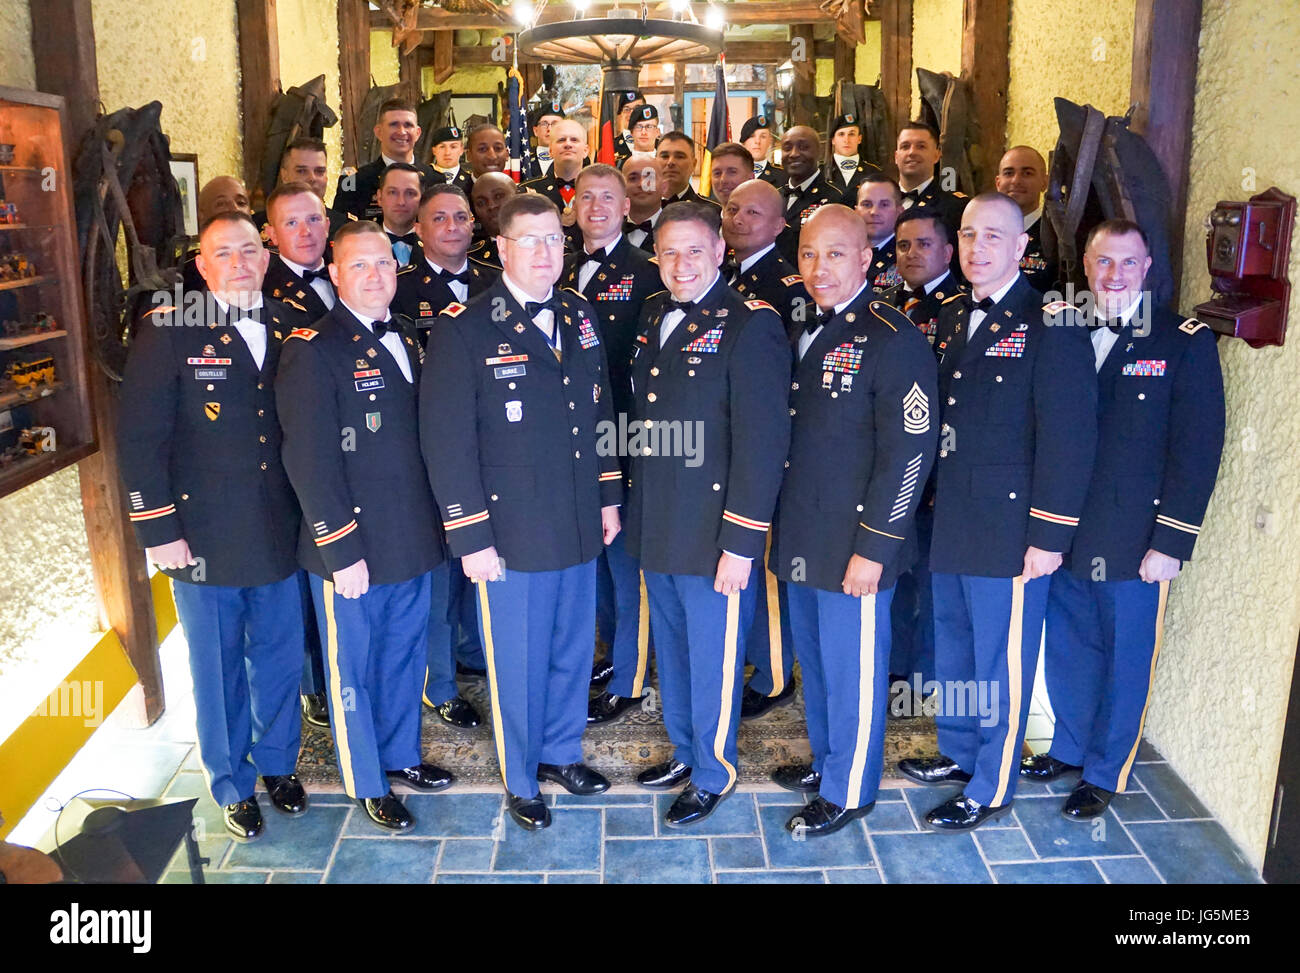 The Joint Multinational Readiness Center's Adler Observer, Coach/Trainer Team attend their annual Dining In held in Velburg, Germany April 2. Lt. Col. Adrian Gamez, Adler Team commander and senior OC/T stands center. The Adler OCT Team teach and mentor leaders and staffs of Brigade Support Battalions, Combat Sustainment Support Battalions and multinational partners preparing them to provide logistic support in austere environments during the conduct of Unified Land Operations. (U.S. Army photo by Sgt. Karen Sampson) Stock Photo